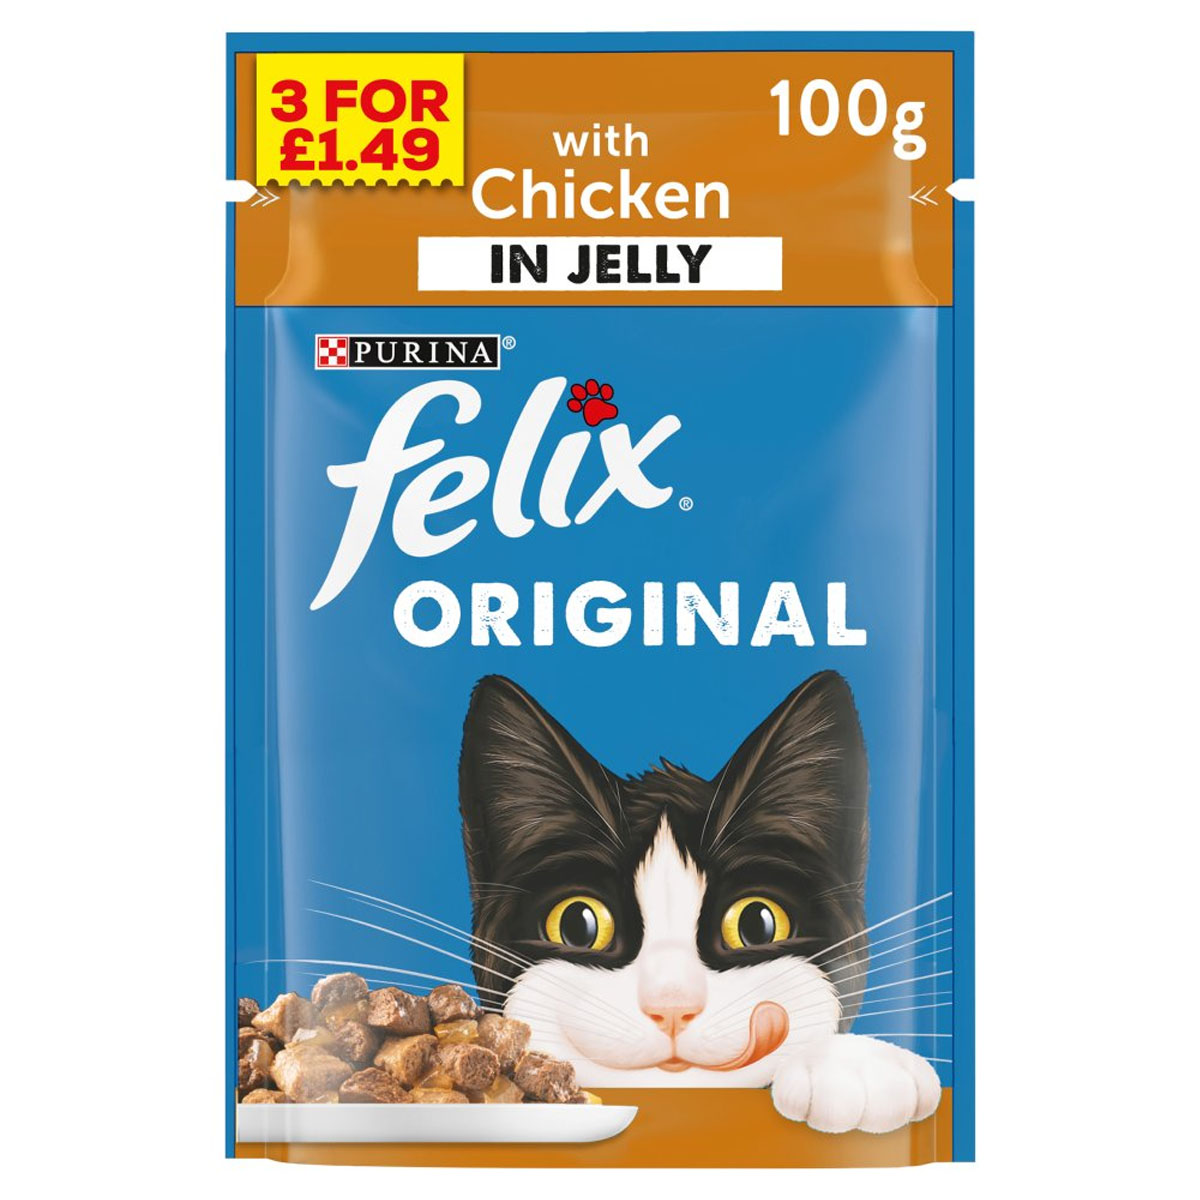 Felix - Original with Chicken in Jelly - 100g - Continental Food Store